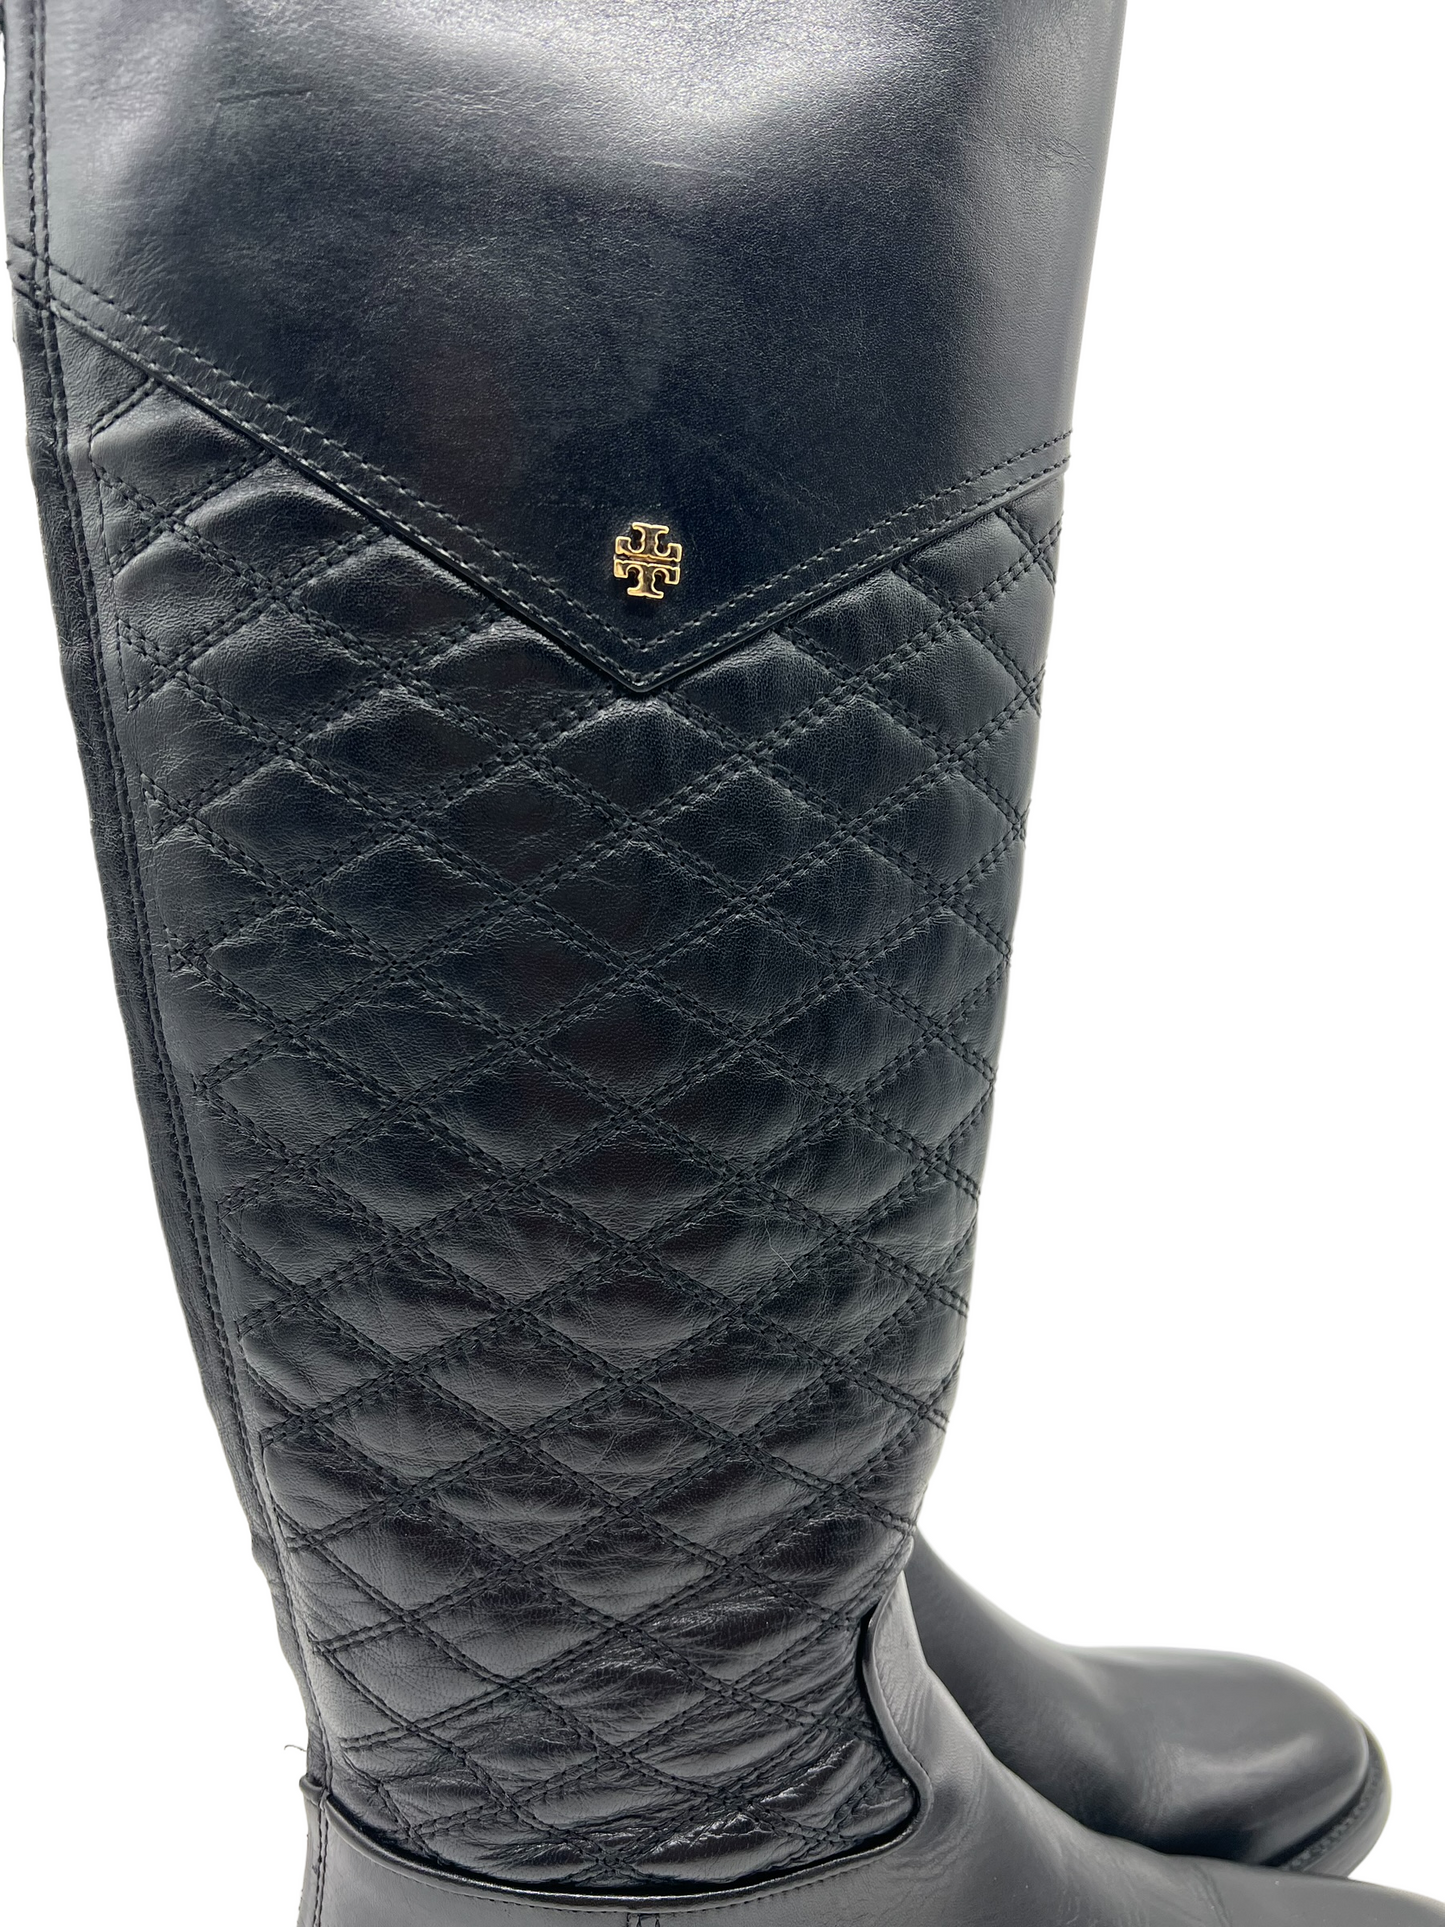 Tory Burch Black Leather Quilted Size 8 Claremont Boots